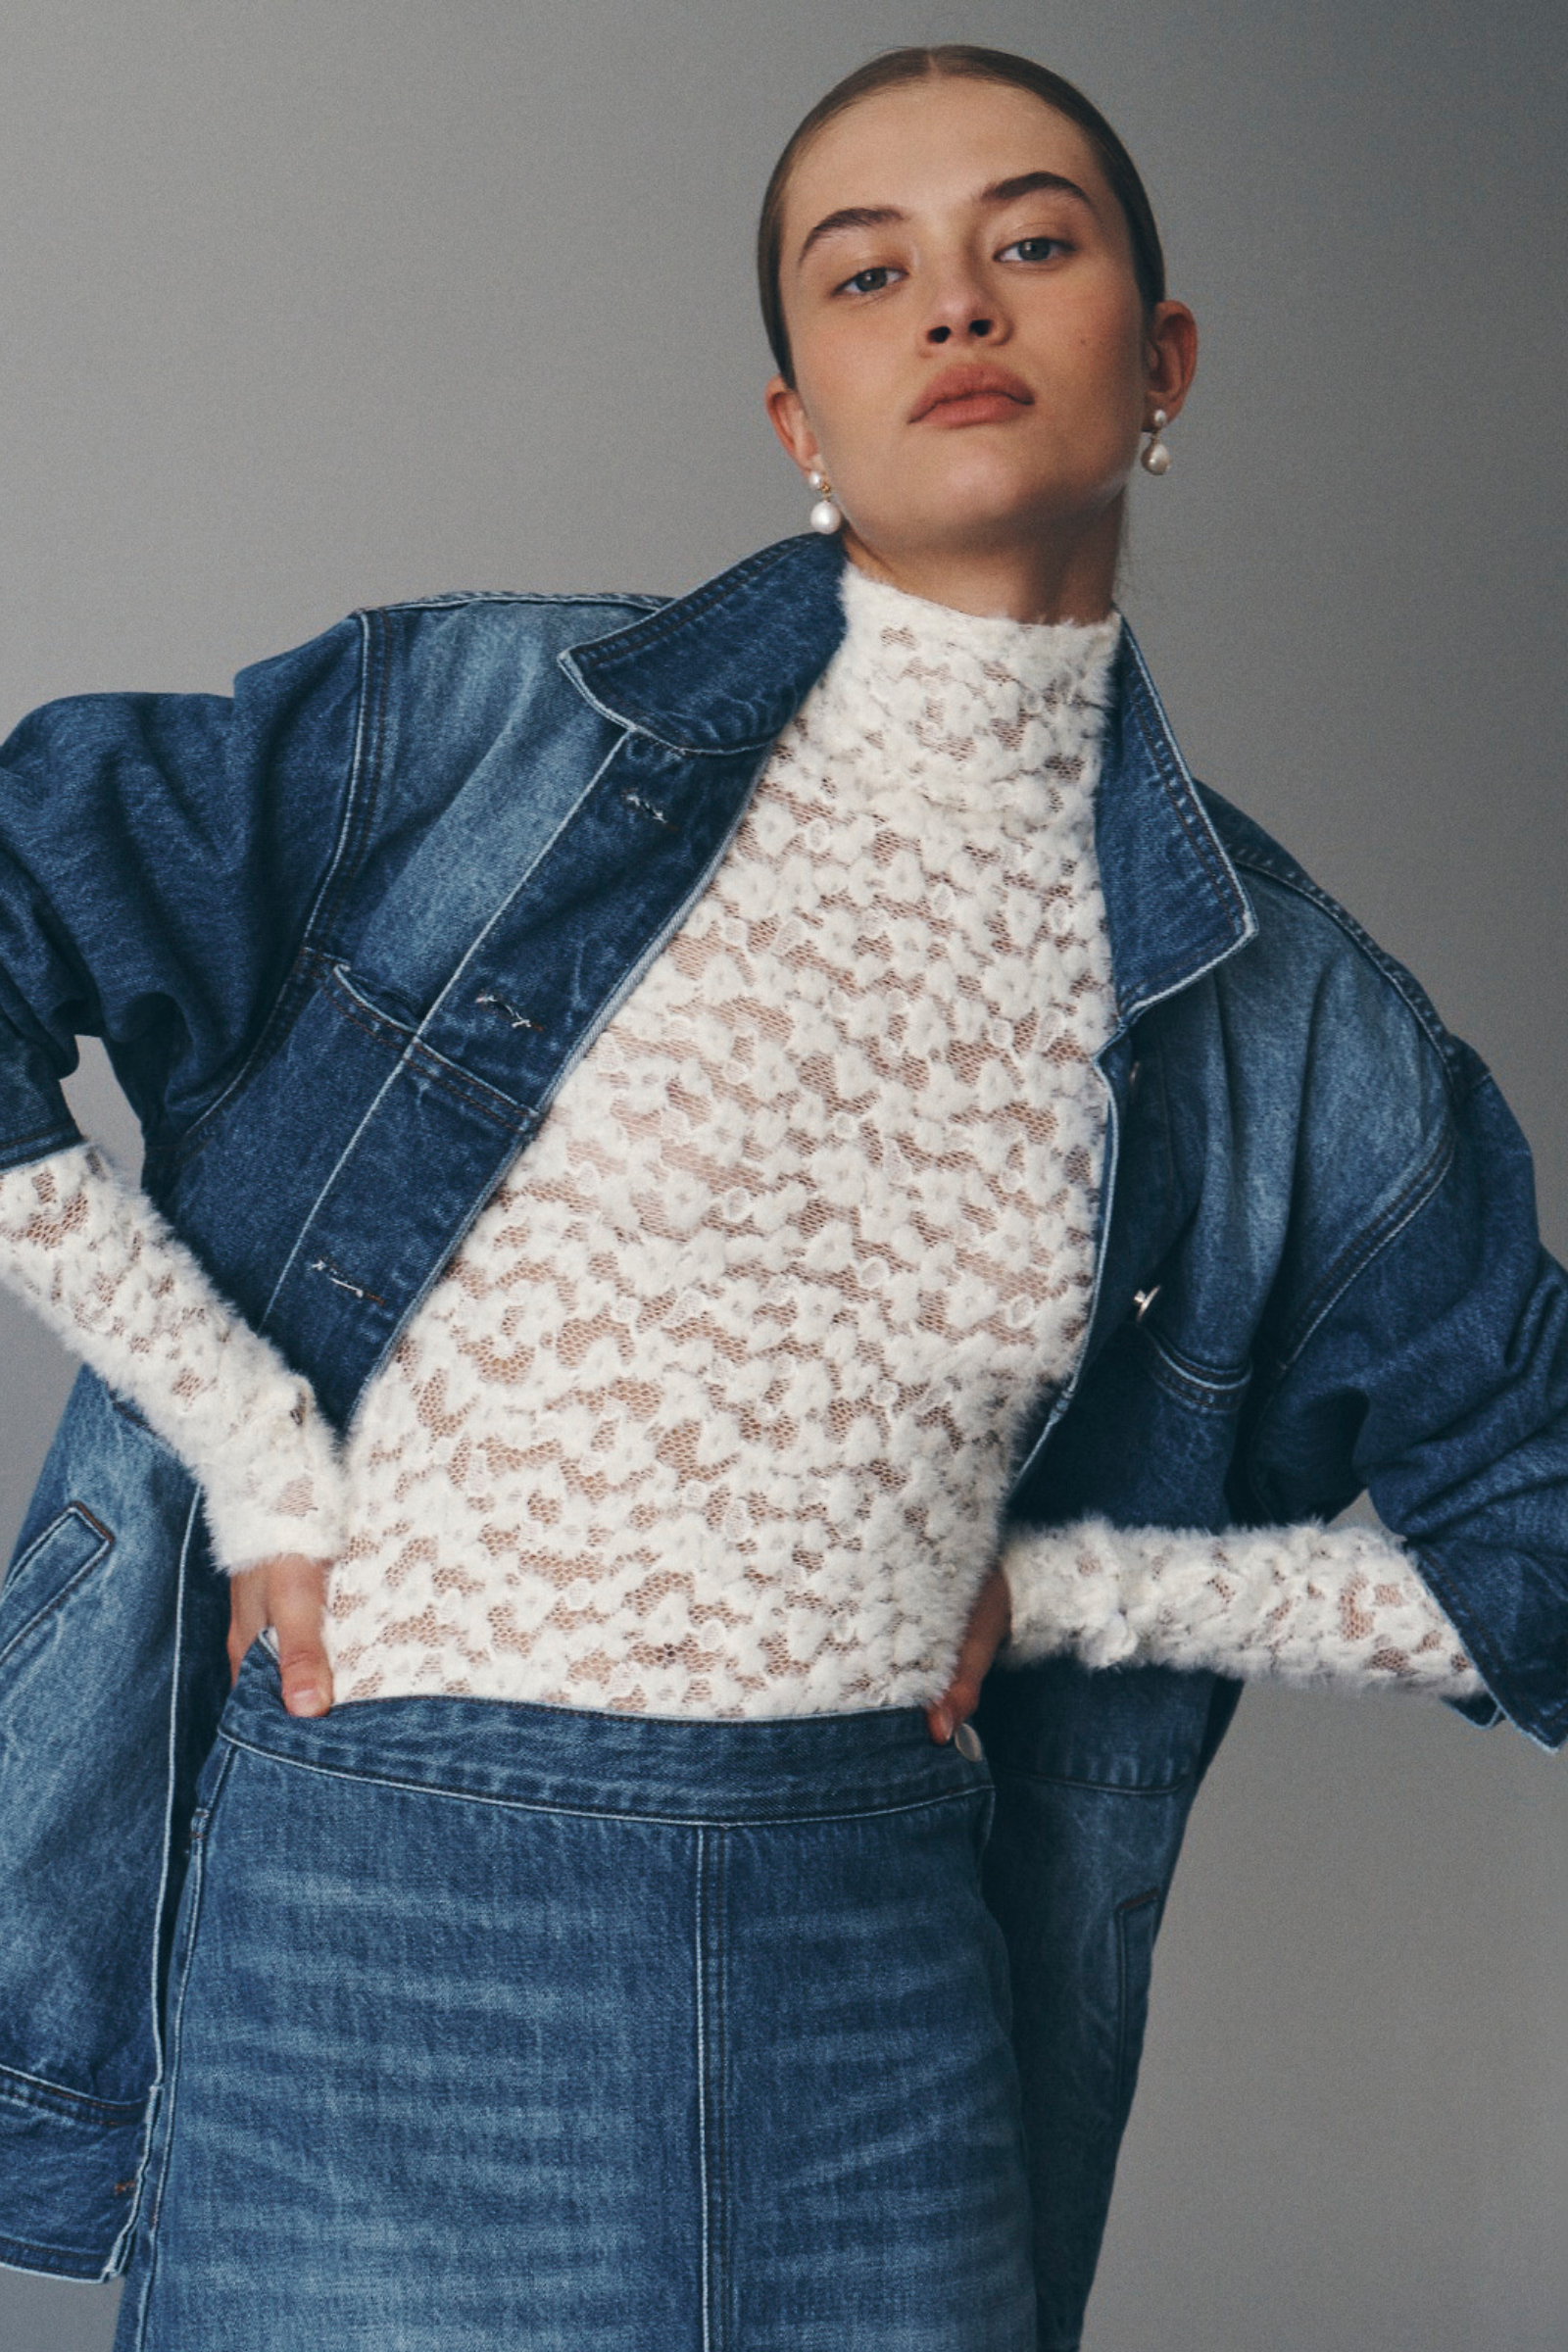 Bianca wears the Iko Relaxed Denim Jacket, Valerie Hemp Midi Skirt, and Galo Lace Fuzzy Top in Creme. All pieces are from ROWIE The Label’s Autumn / Winter ’24 Collection.